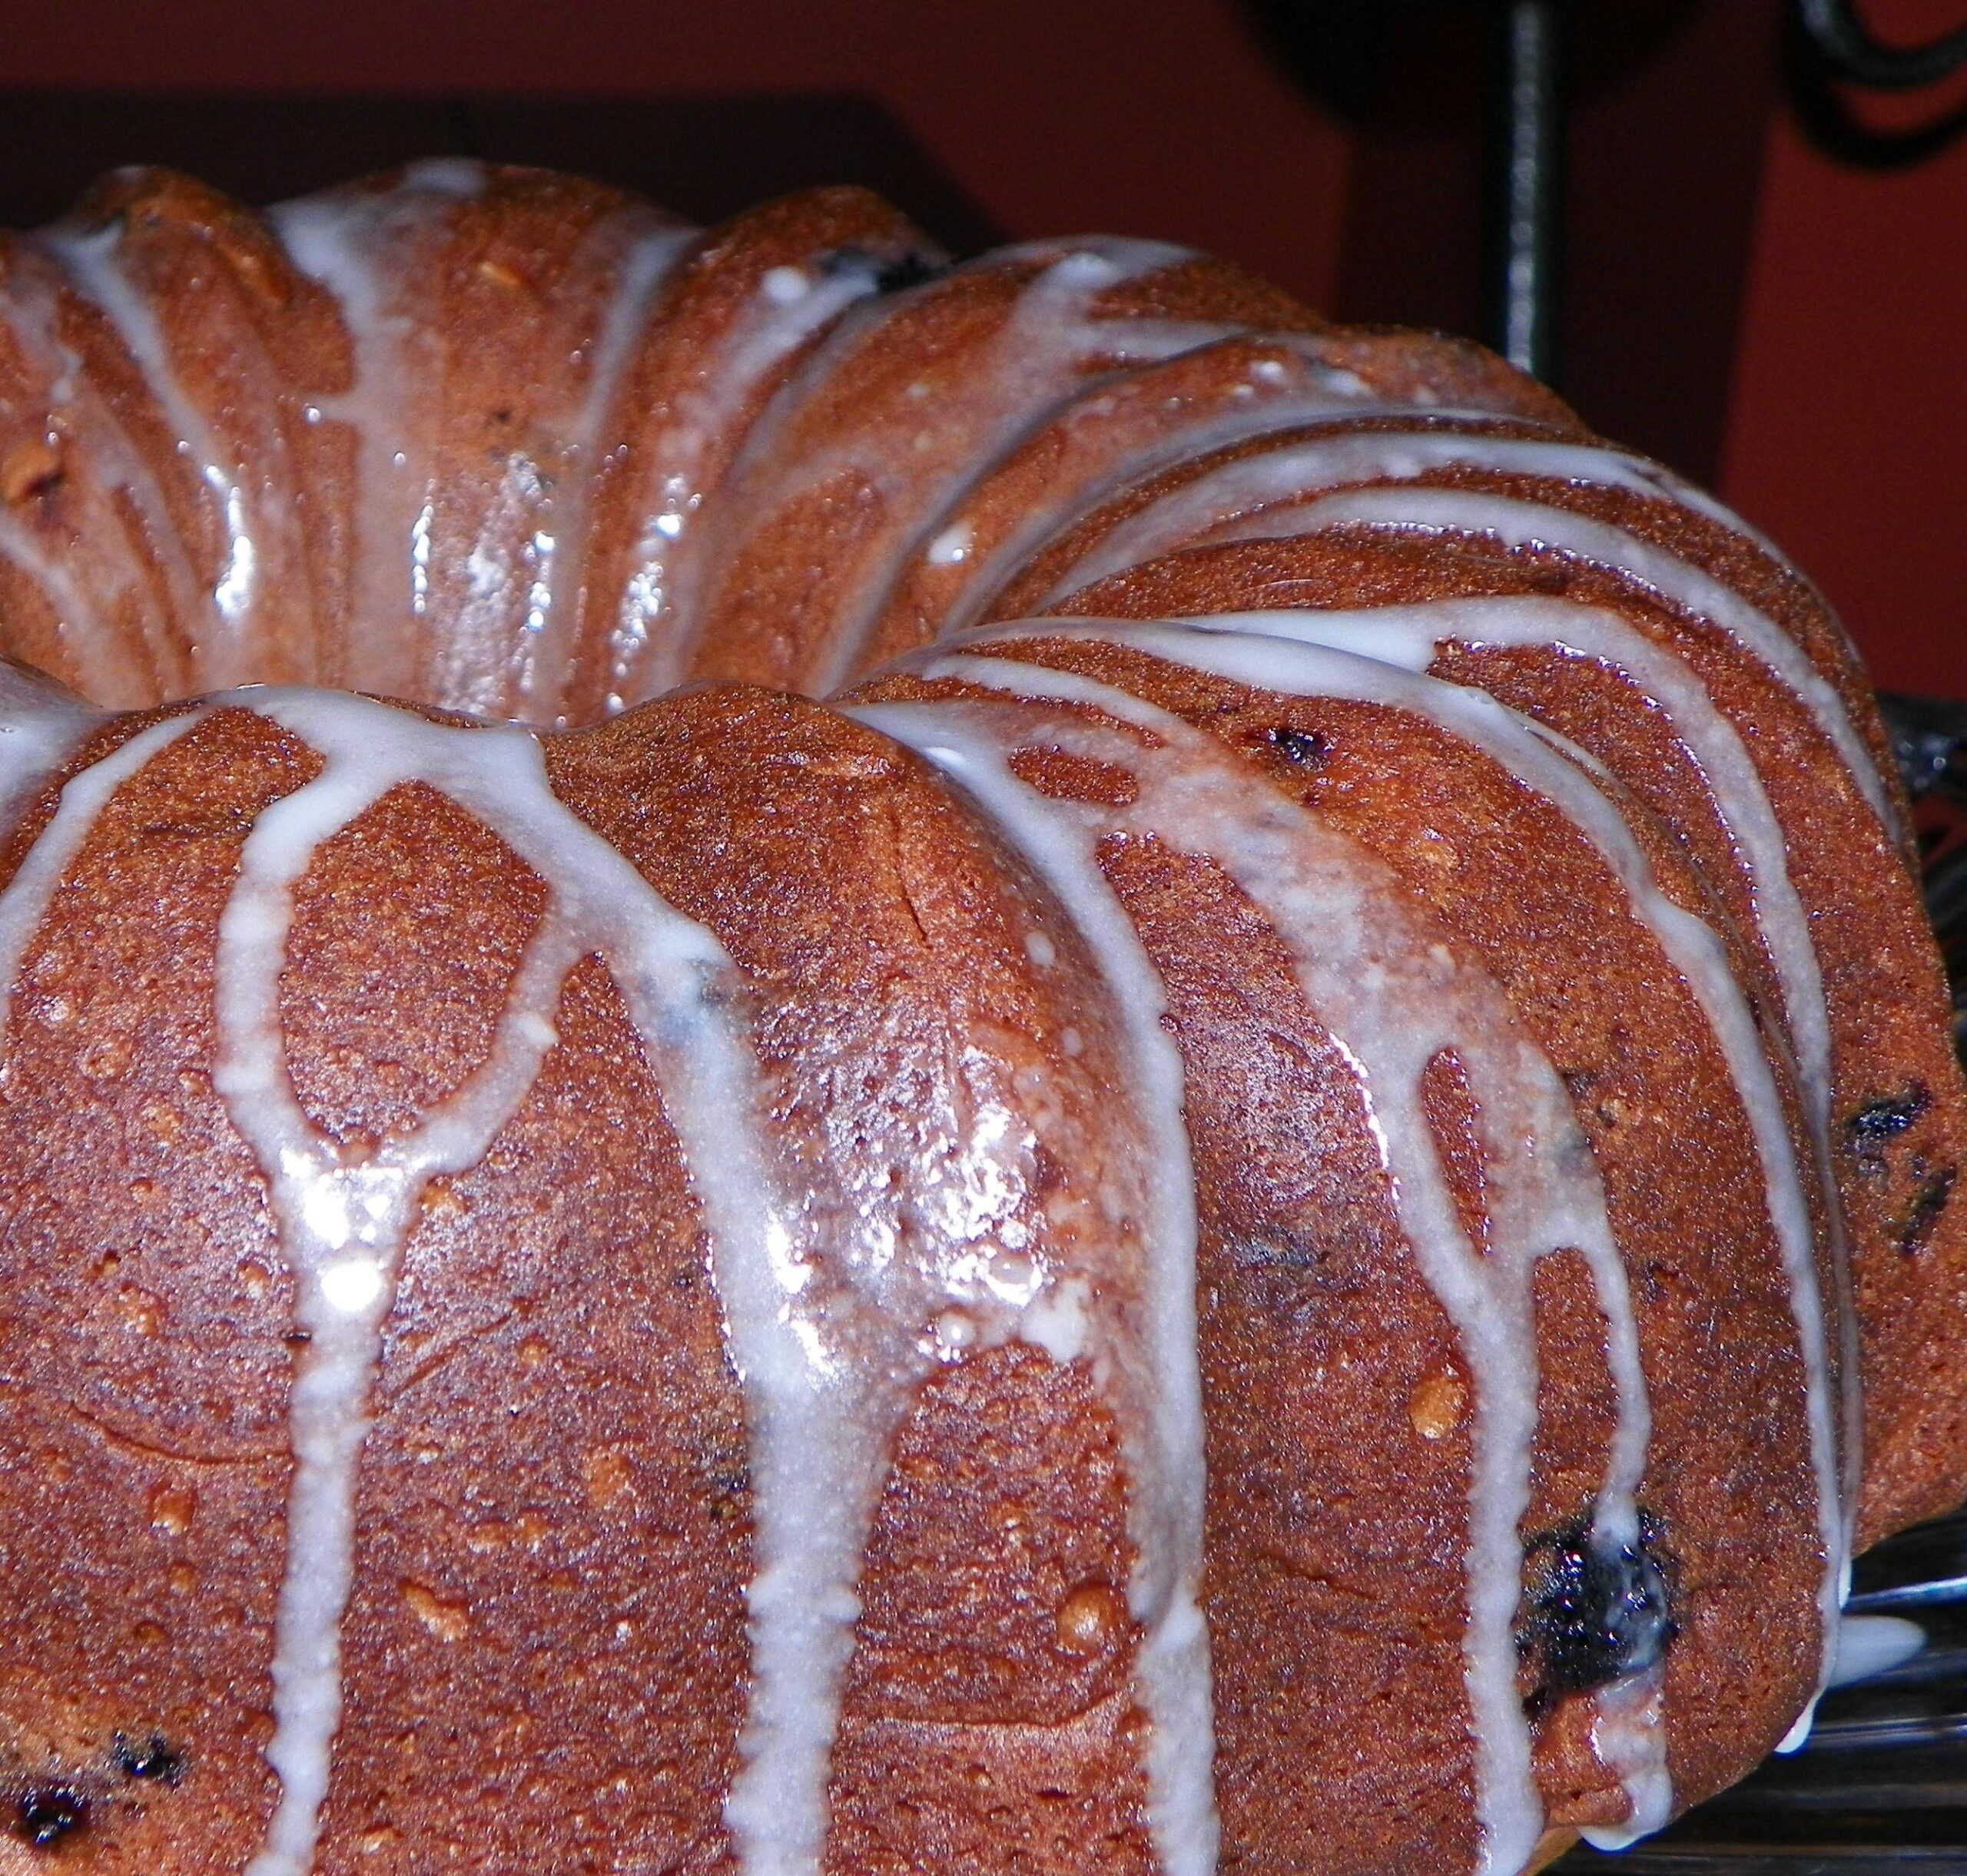  Satisfy your sweet tooth with a slice of this Blueberry Pound Cake